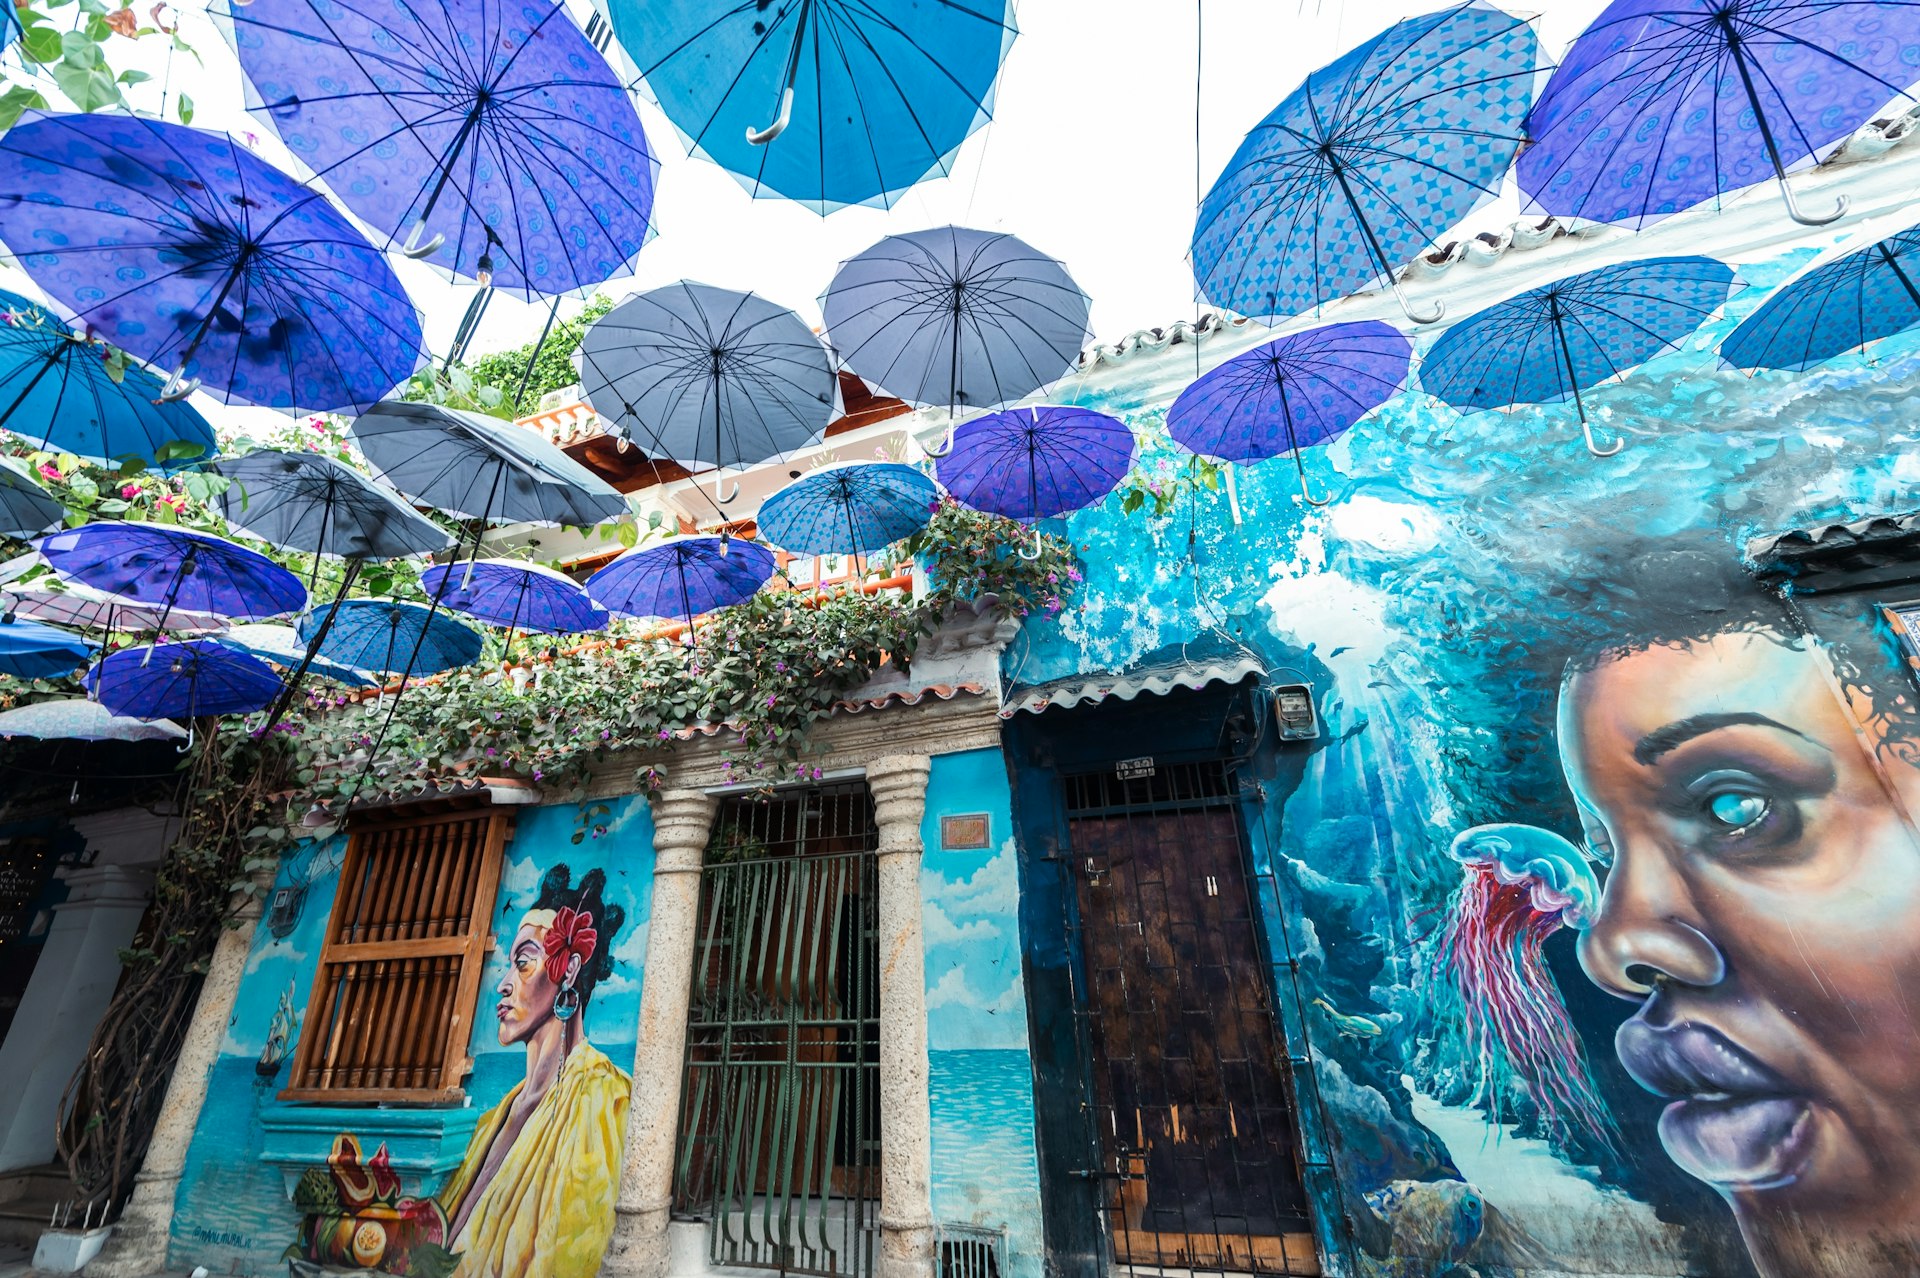 Street art in shades of blues, greens and purple is complemented by decorative umbrellas hanging in the street above head height